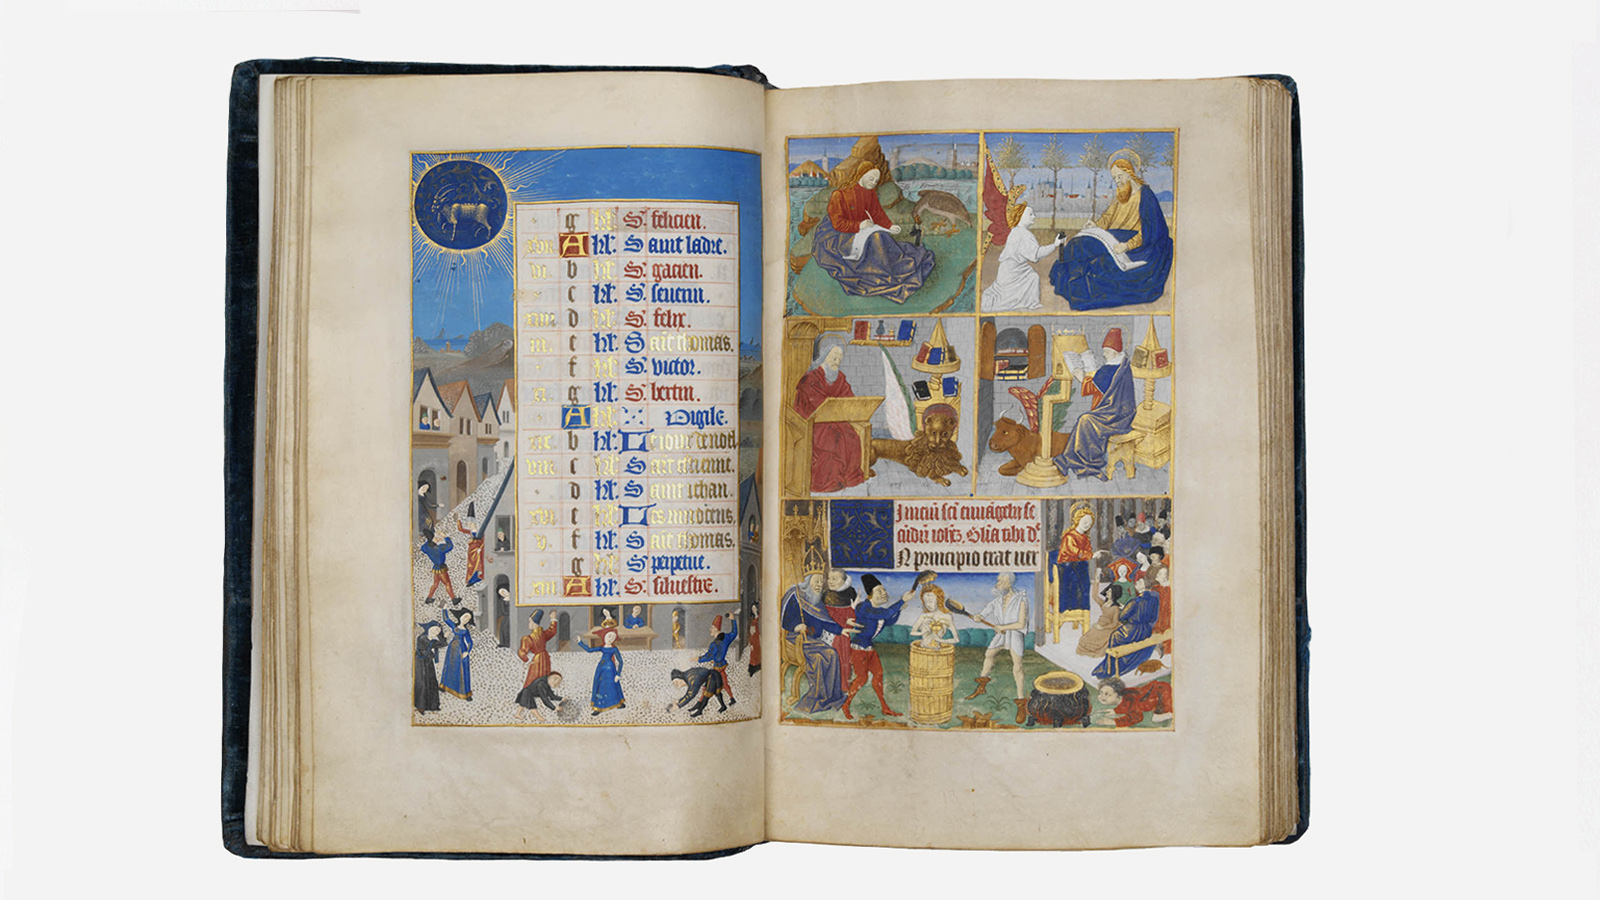 Book of Hours. Paintings by two followers of the Master of Adelaide of Savoy, by an illuminator of the circle of the Master of Jouvenel and by an artist from Tours in the style of Jean Fouquet. France (Poitiers and/or Tours ?), c. 1460–70. Manuscript on parchment. Fol. 12v – Winter games in the snow (border); fol. 13r – Four evangelists (upper section); sermon and martyrdom of St John the Evangelist (lower section). Calouste Gulbenkian Museum